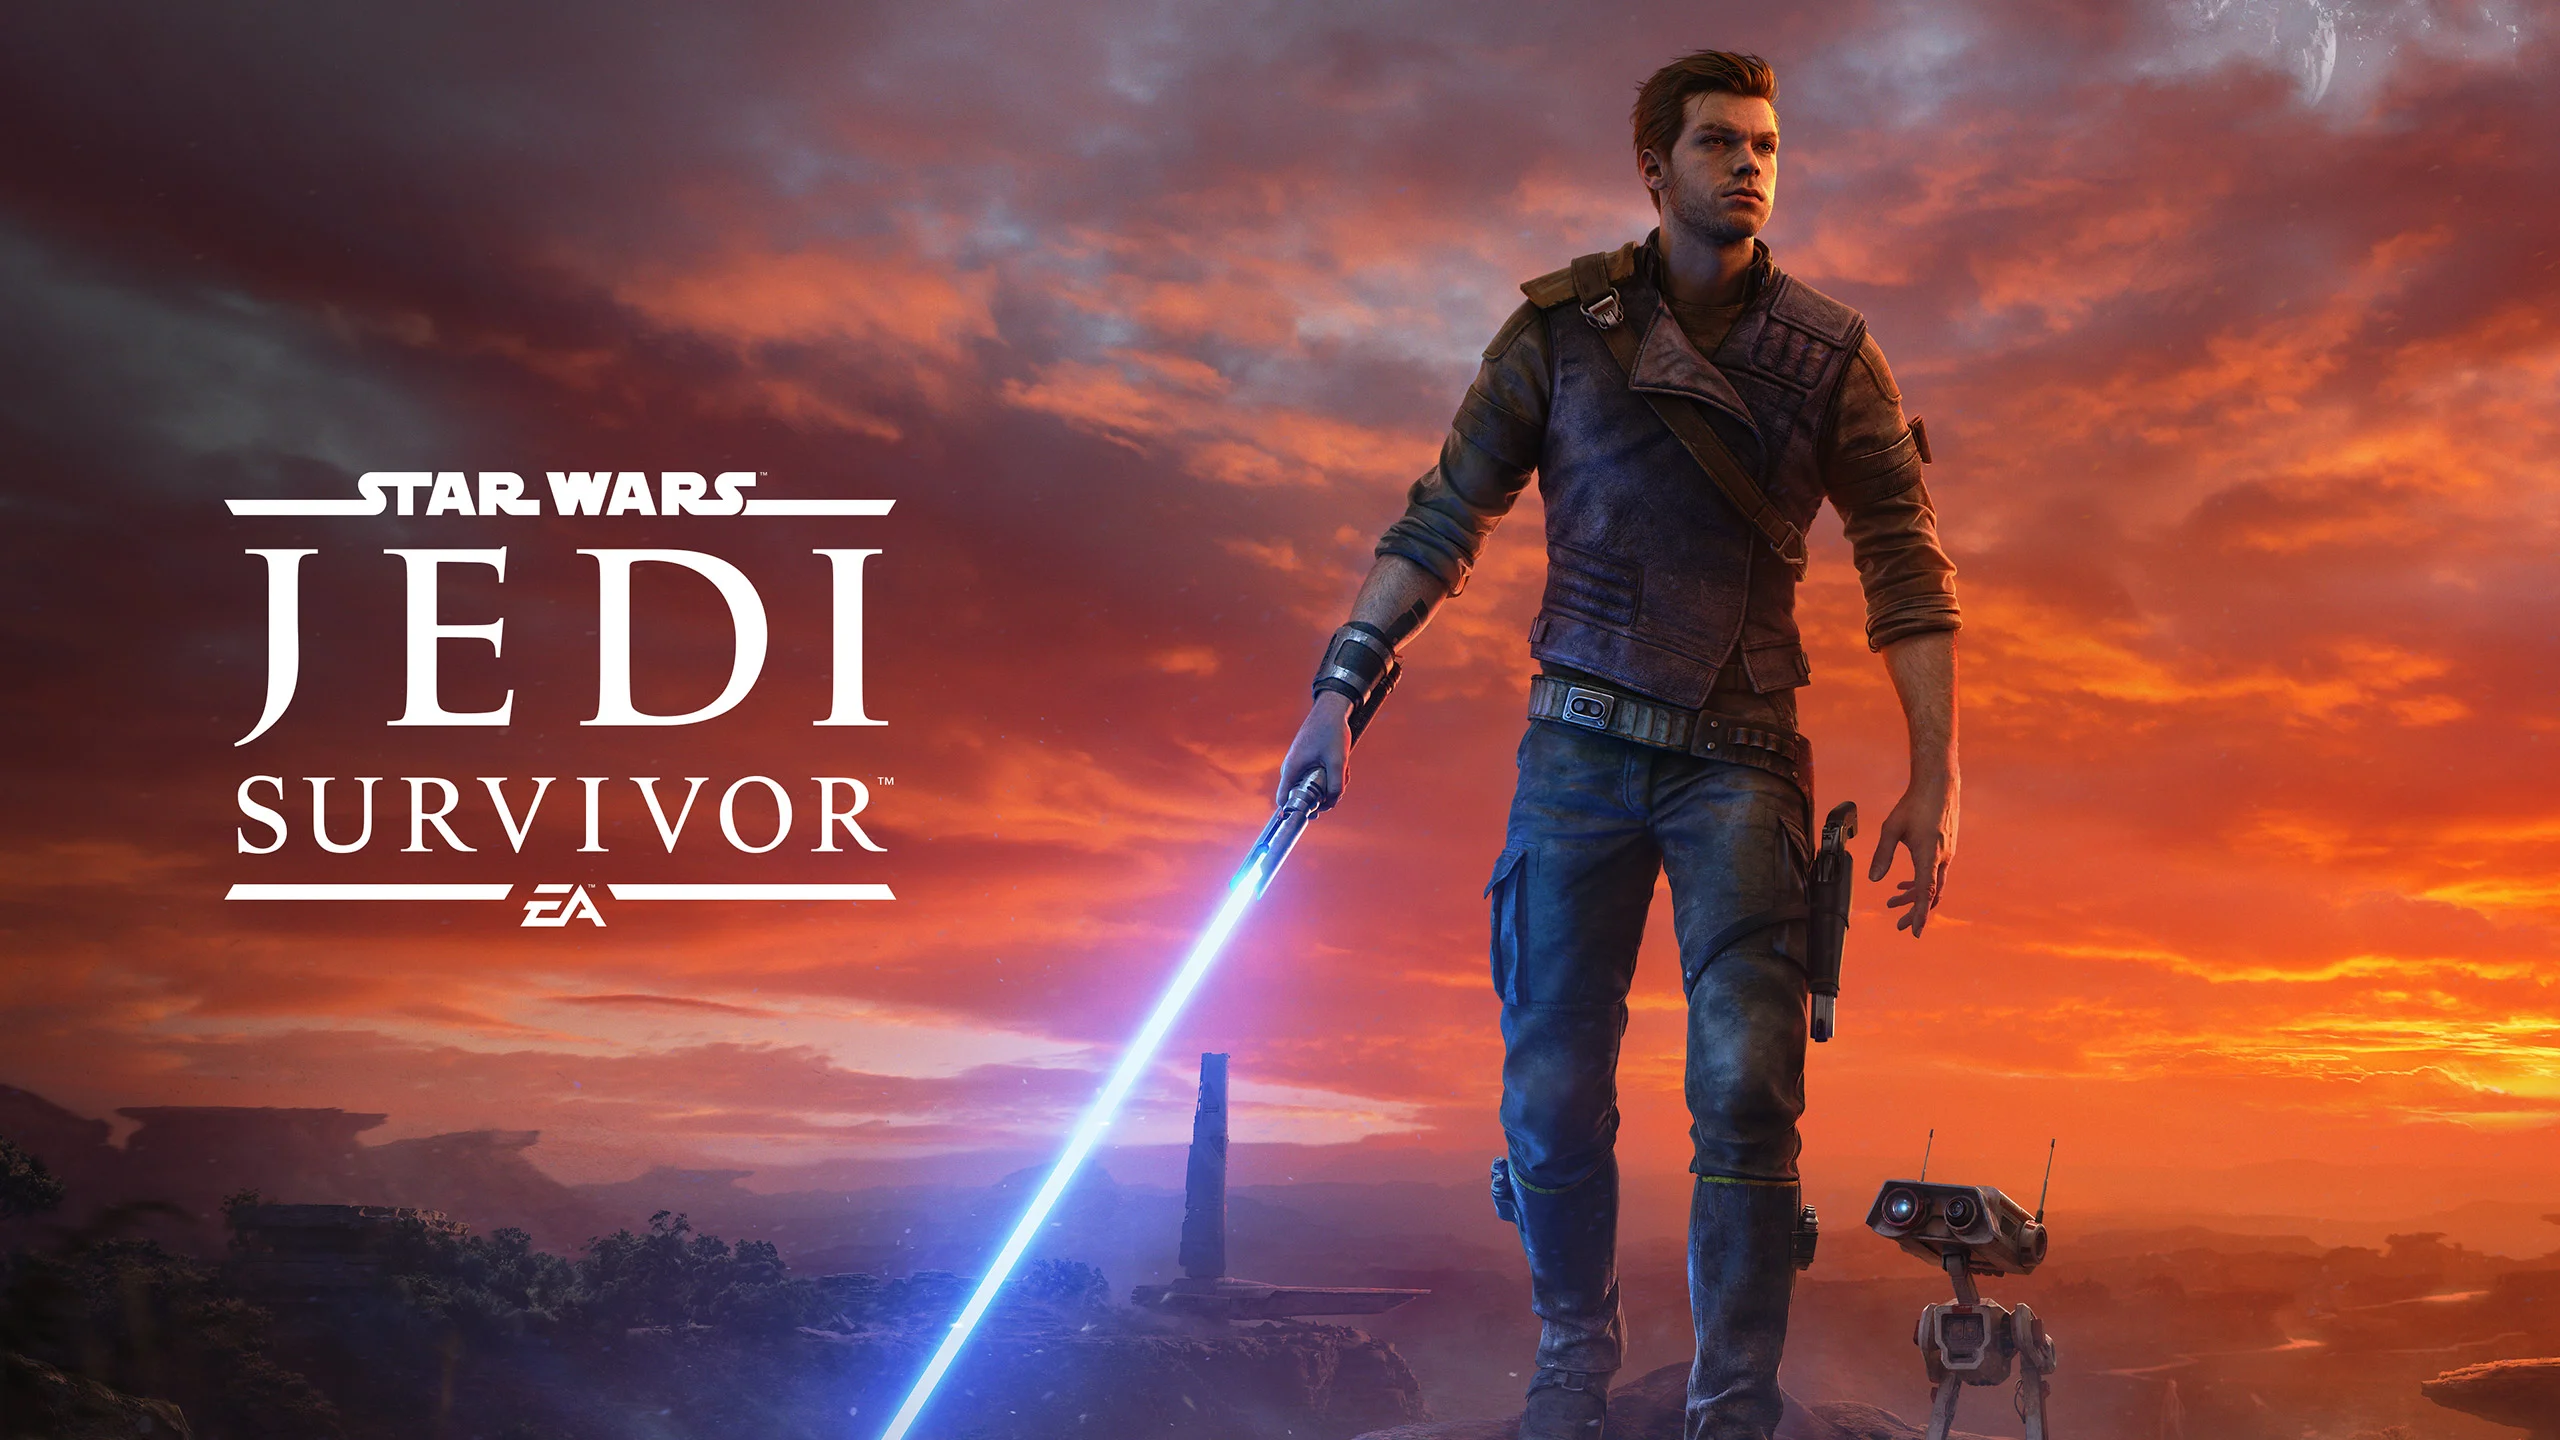 Star Wars Jedi: Survivor Trophy Guide: All Trophies and How to